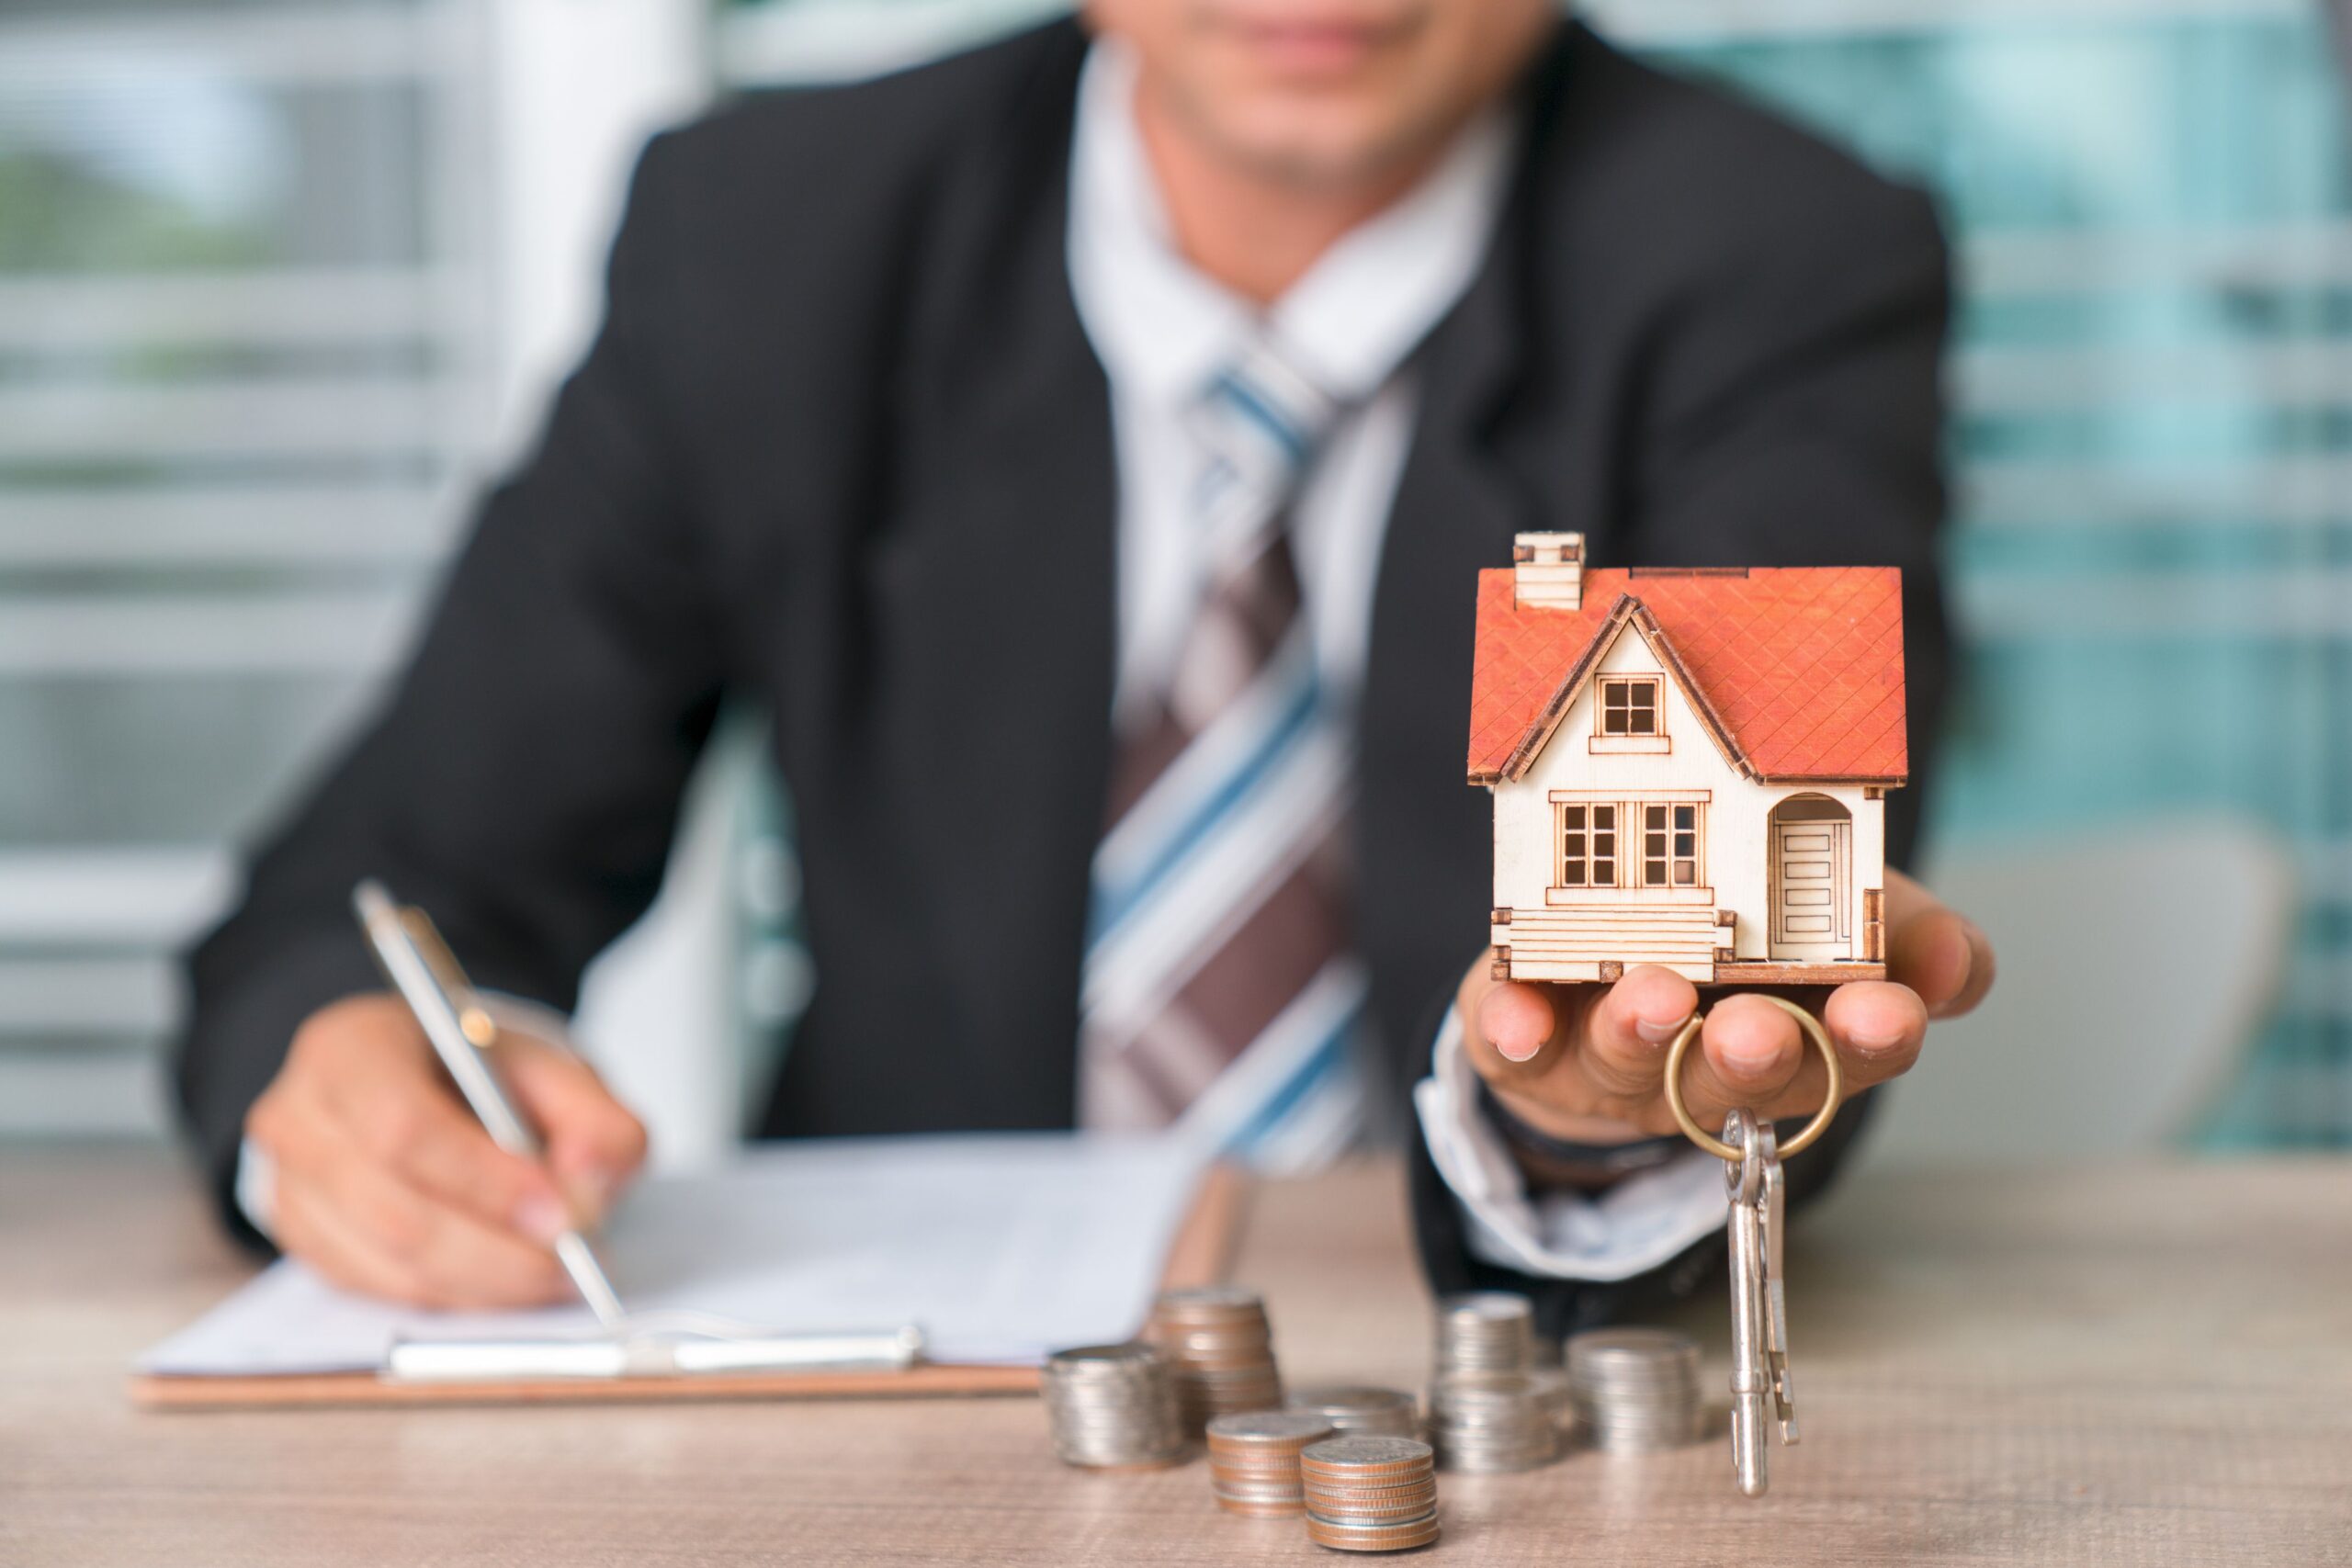 Will selling a house as-is affect its value?